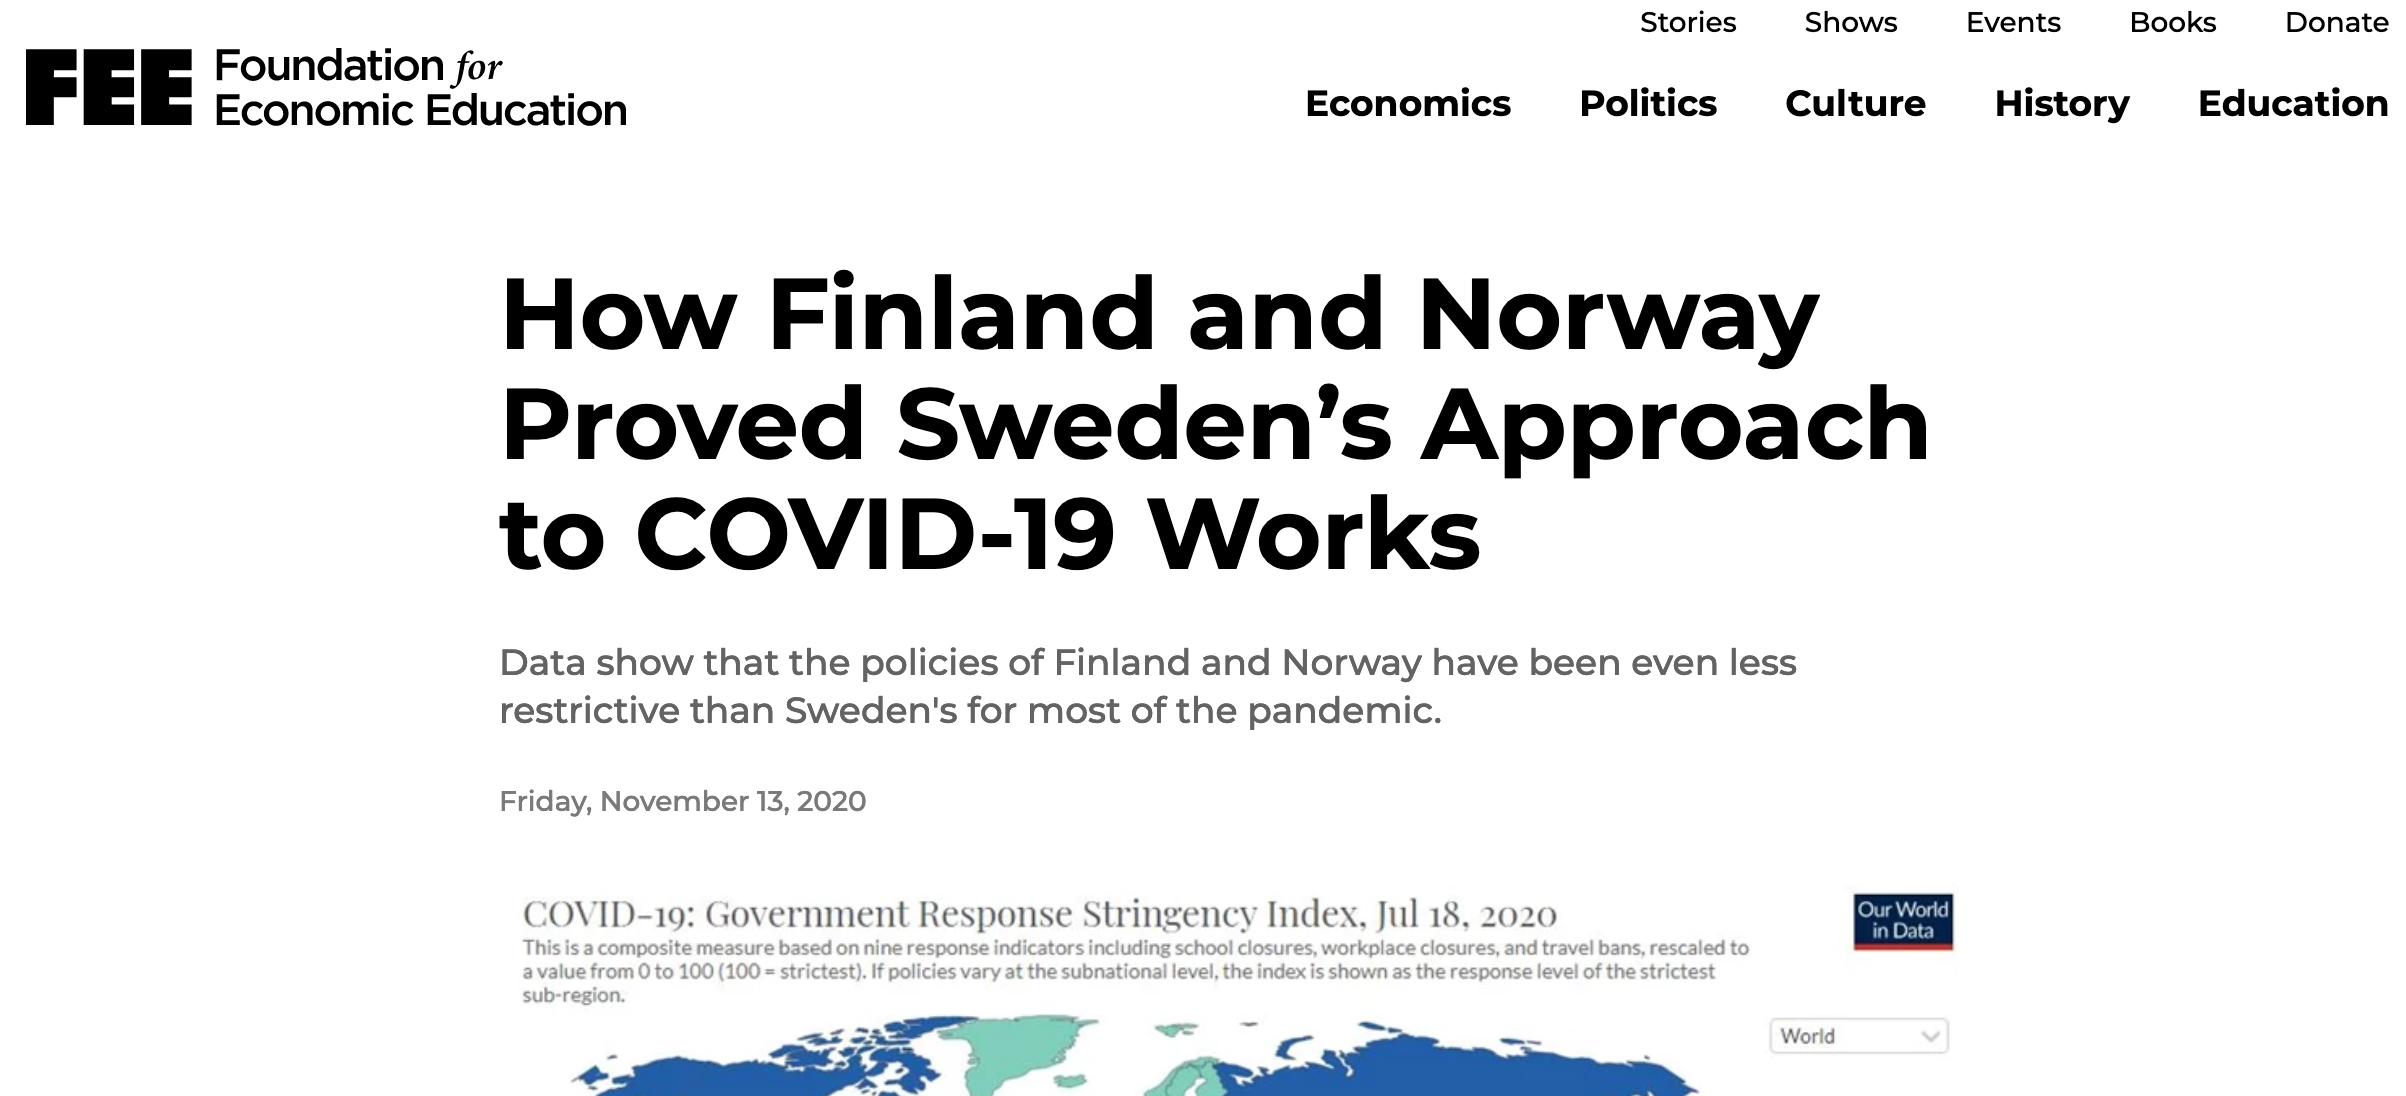 How Finland and Norway Proved Sweden’s Approach to COVID-19 Works